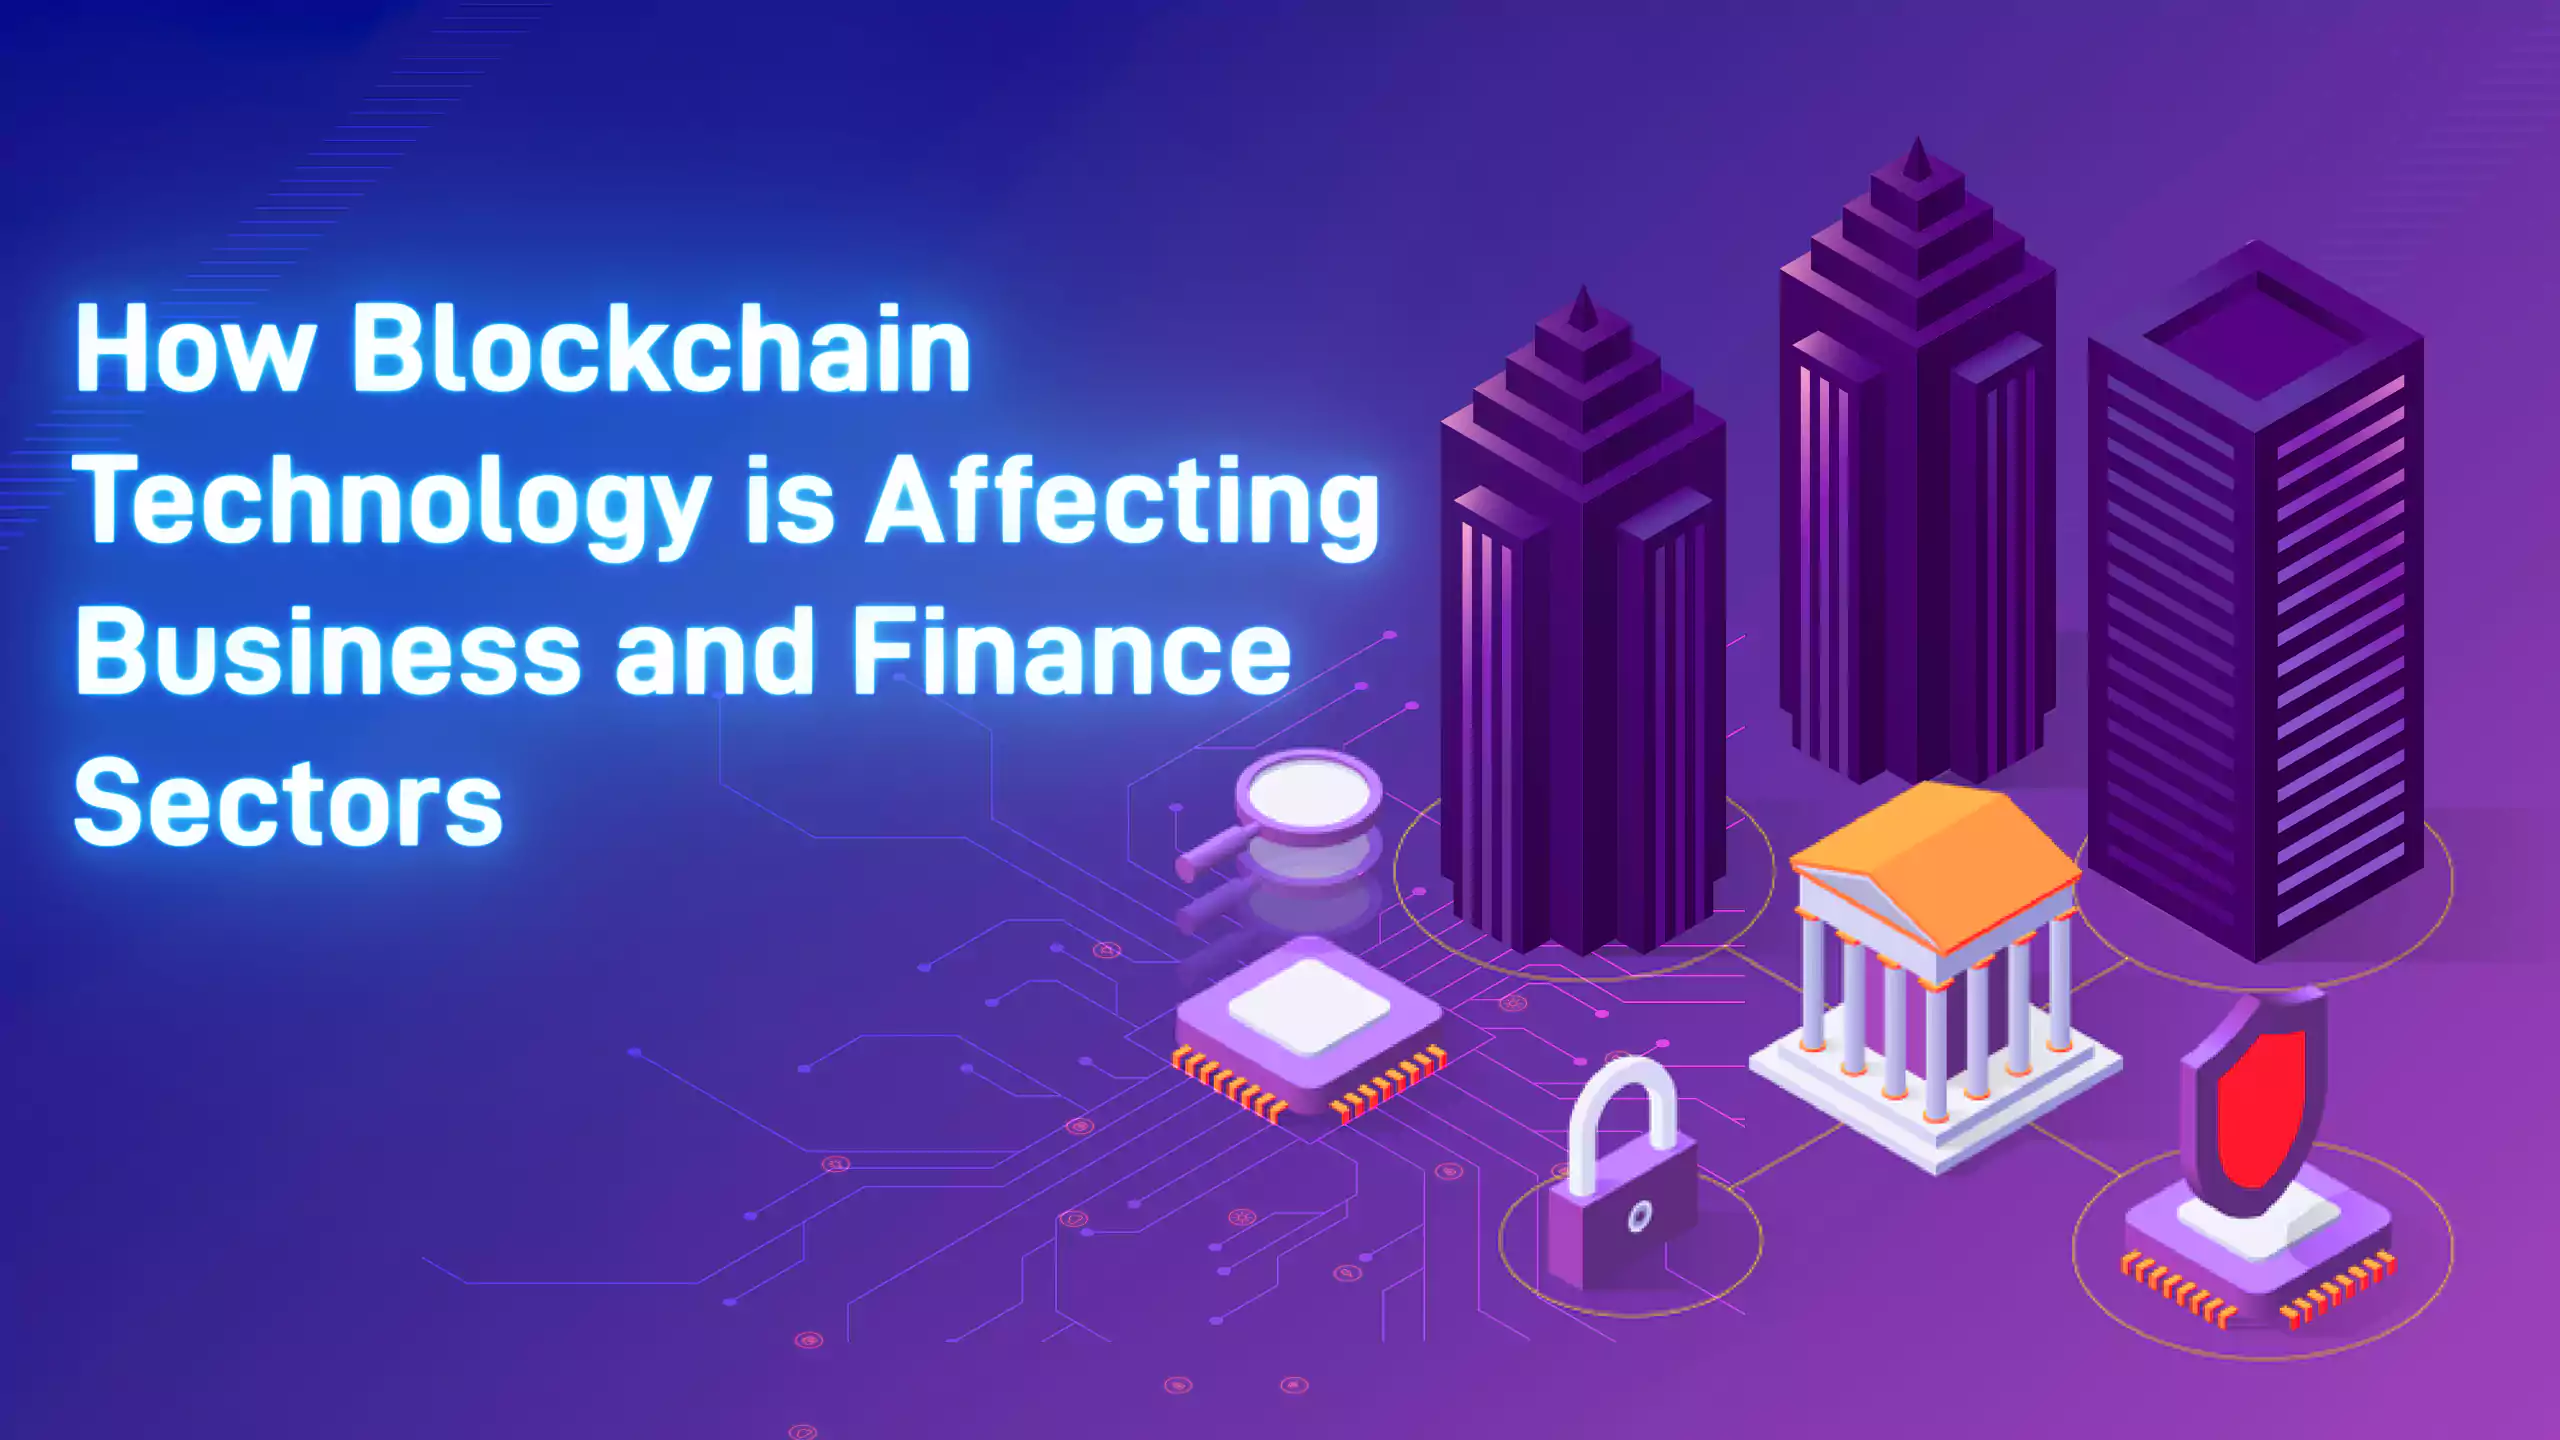 How Blockchain Technology is Affecting Business and Finance Sectors